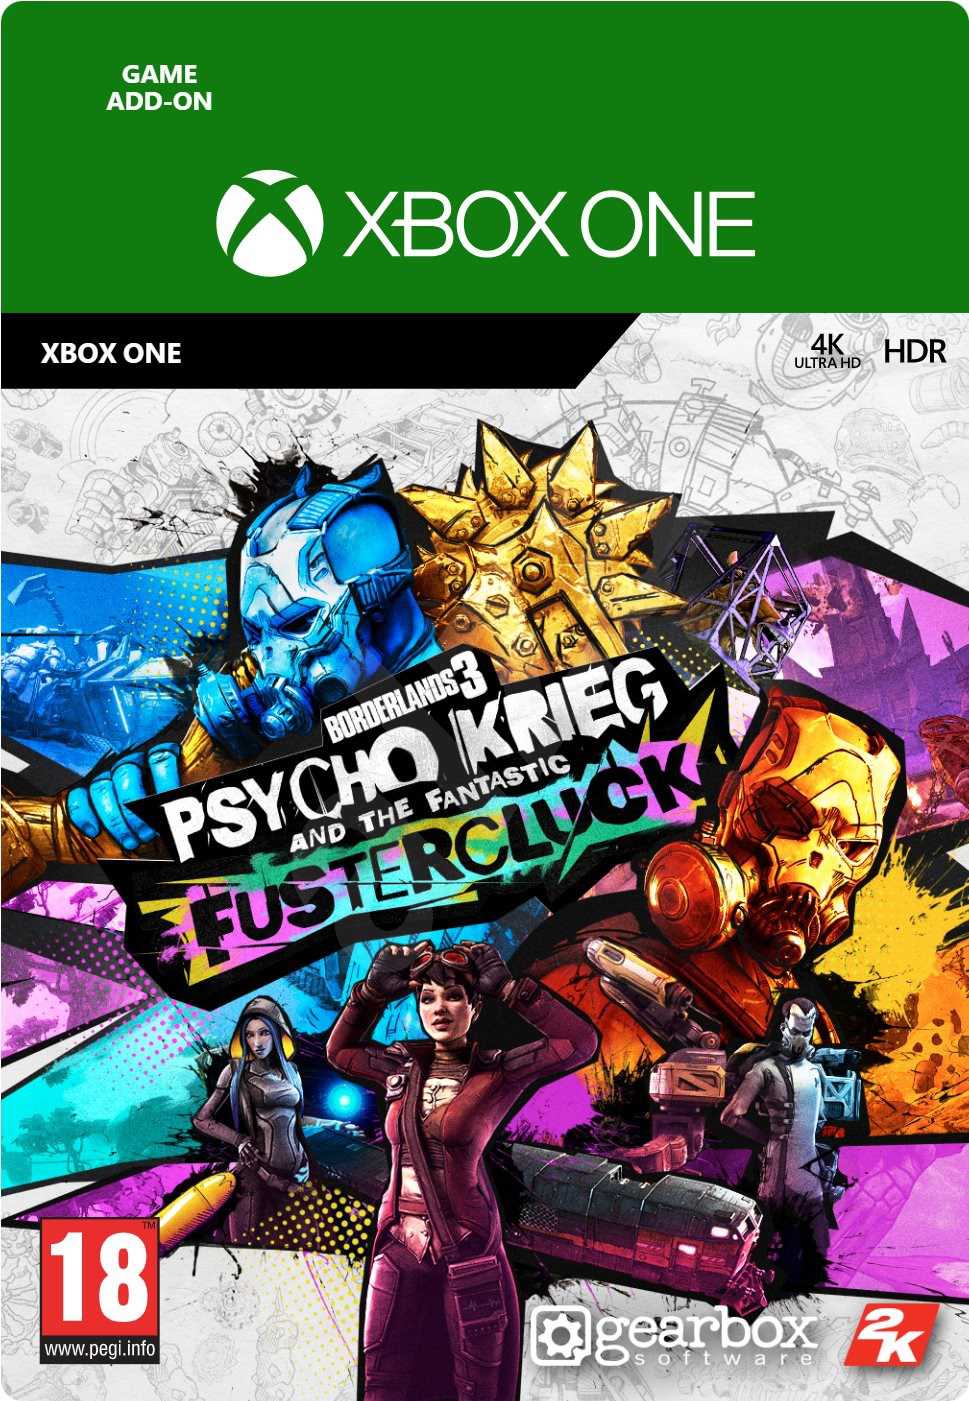 borderlands 3: psycho krieg and the fantastic fustercluck [xbox one